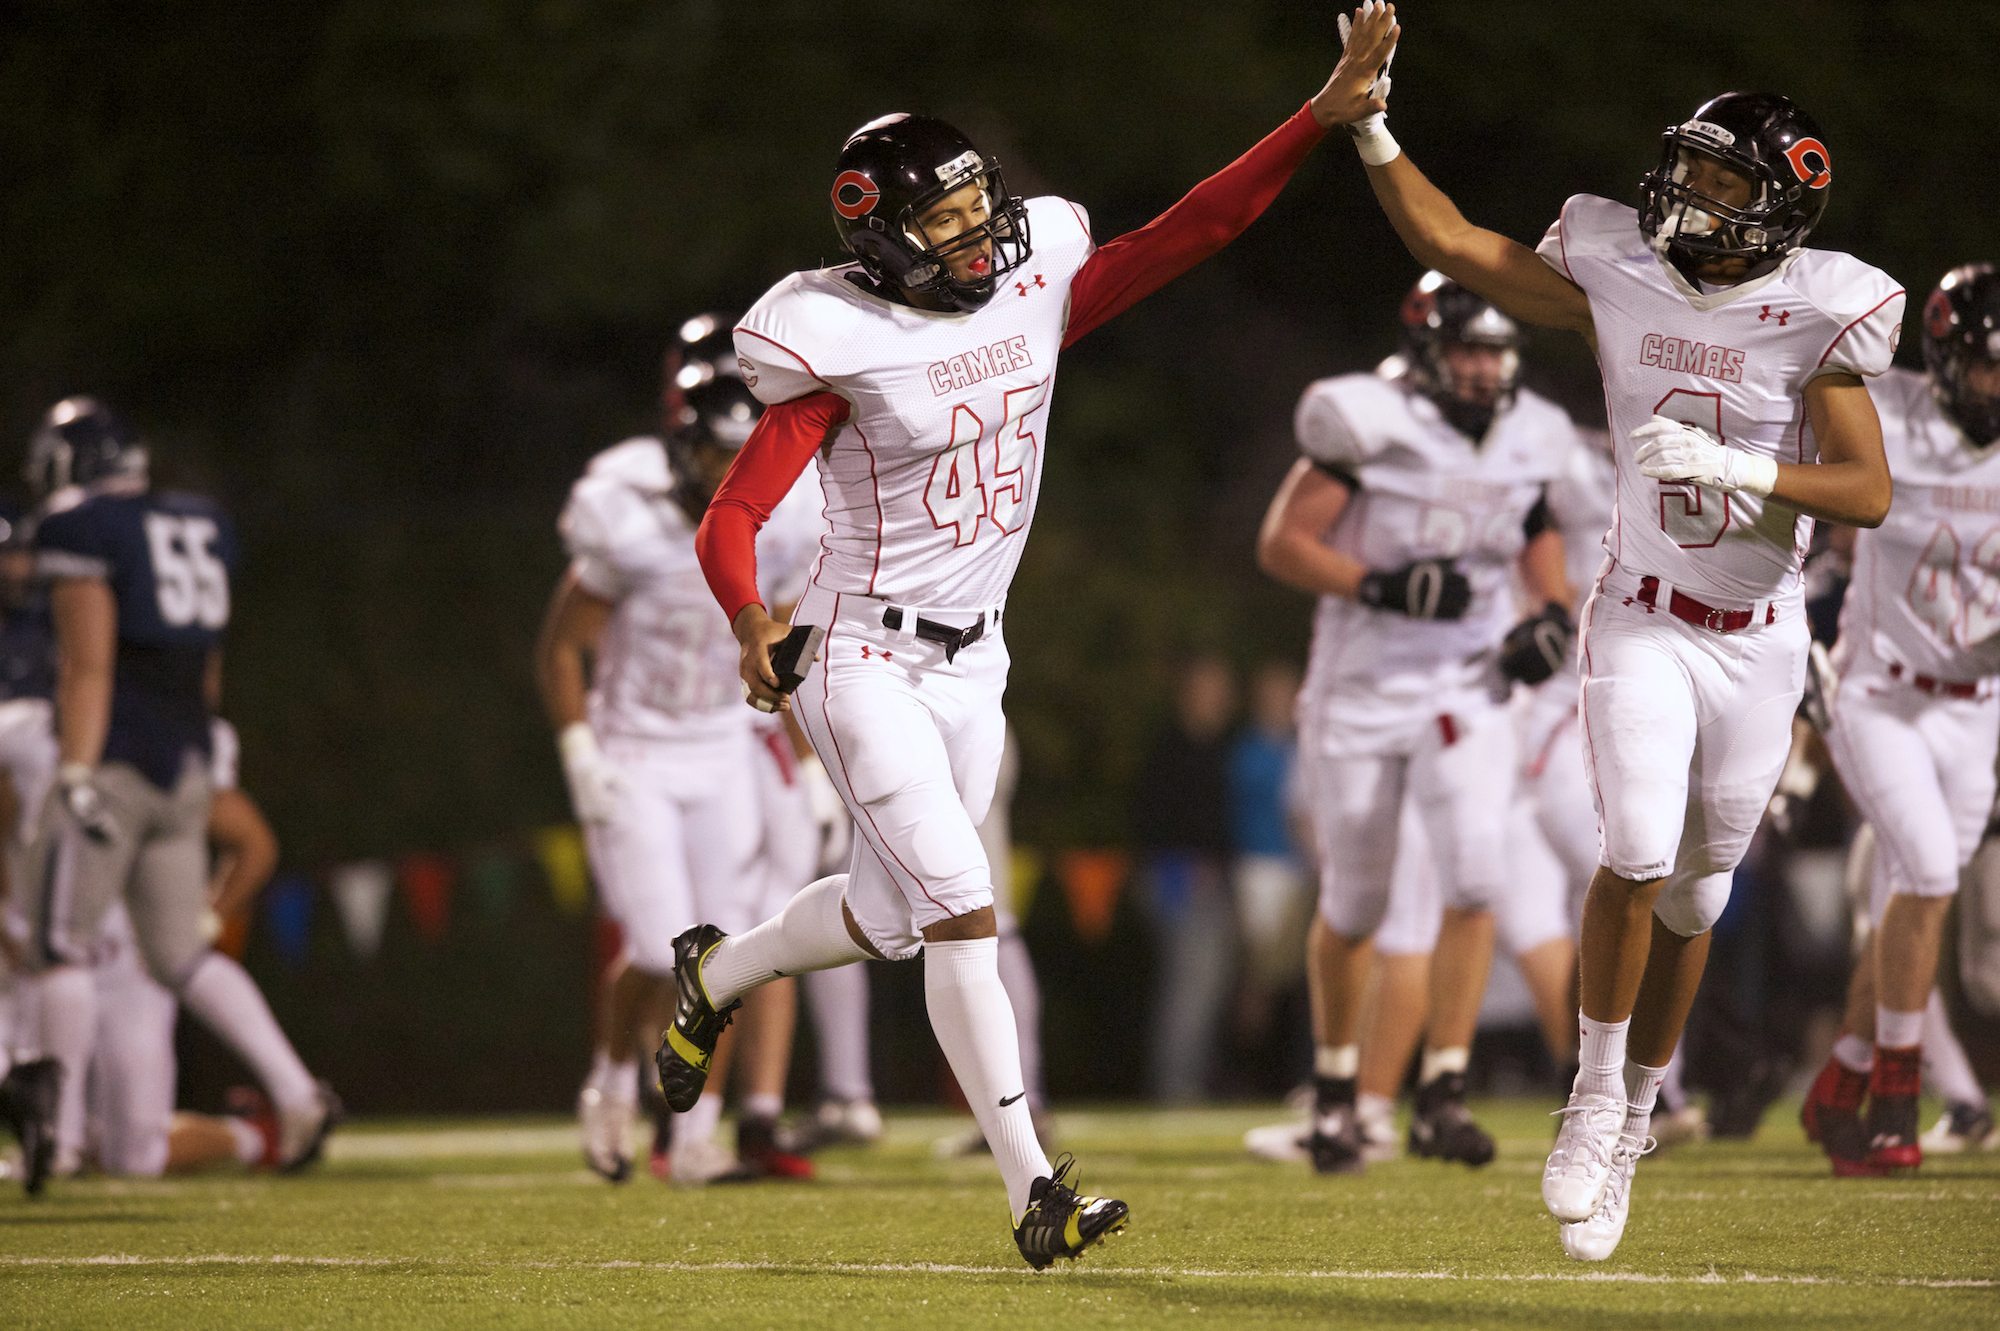 Kicker Caleb Lightbourn, #45, is congratulated after a field goal against Skyview, October 4, 2013.